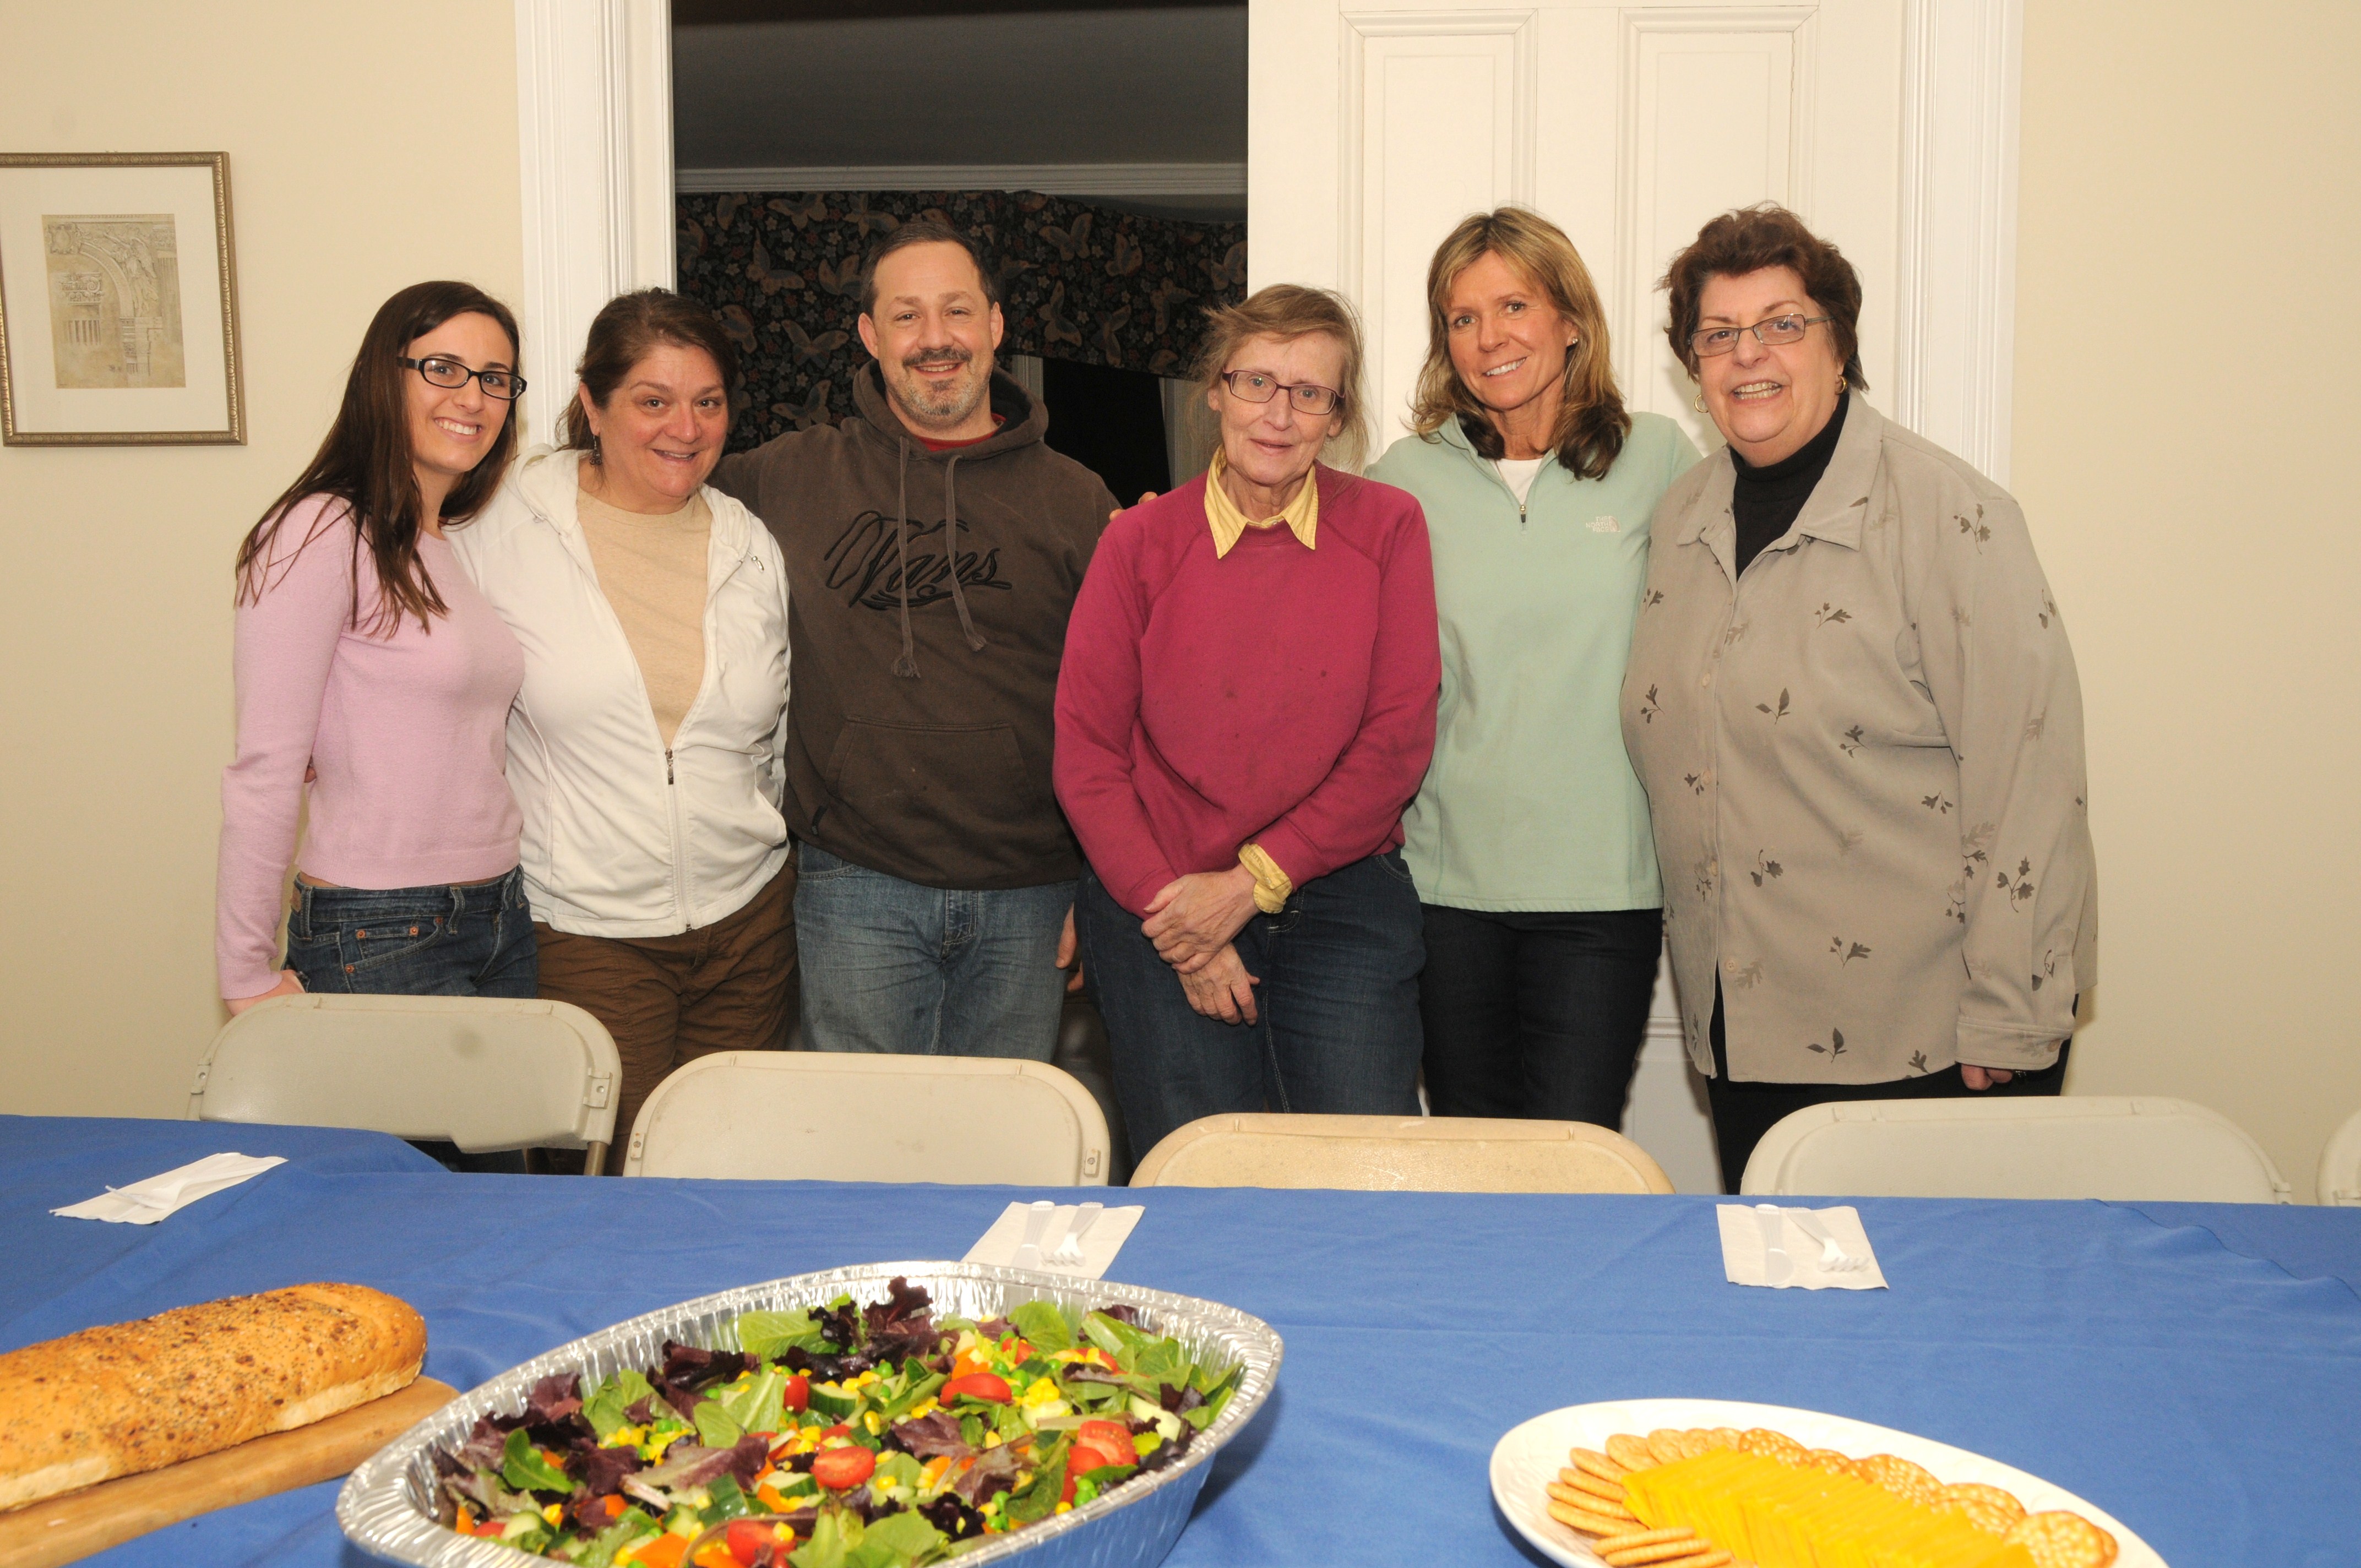 Local Maureen’s Haven volunteers Hanna Riege, Kerry Riege, Chris Tucci, Antje Katcher, Cathy Irvine, Marge Harvey